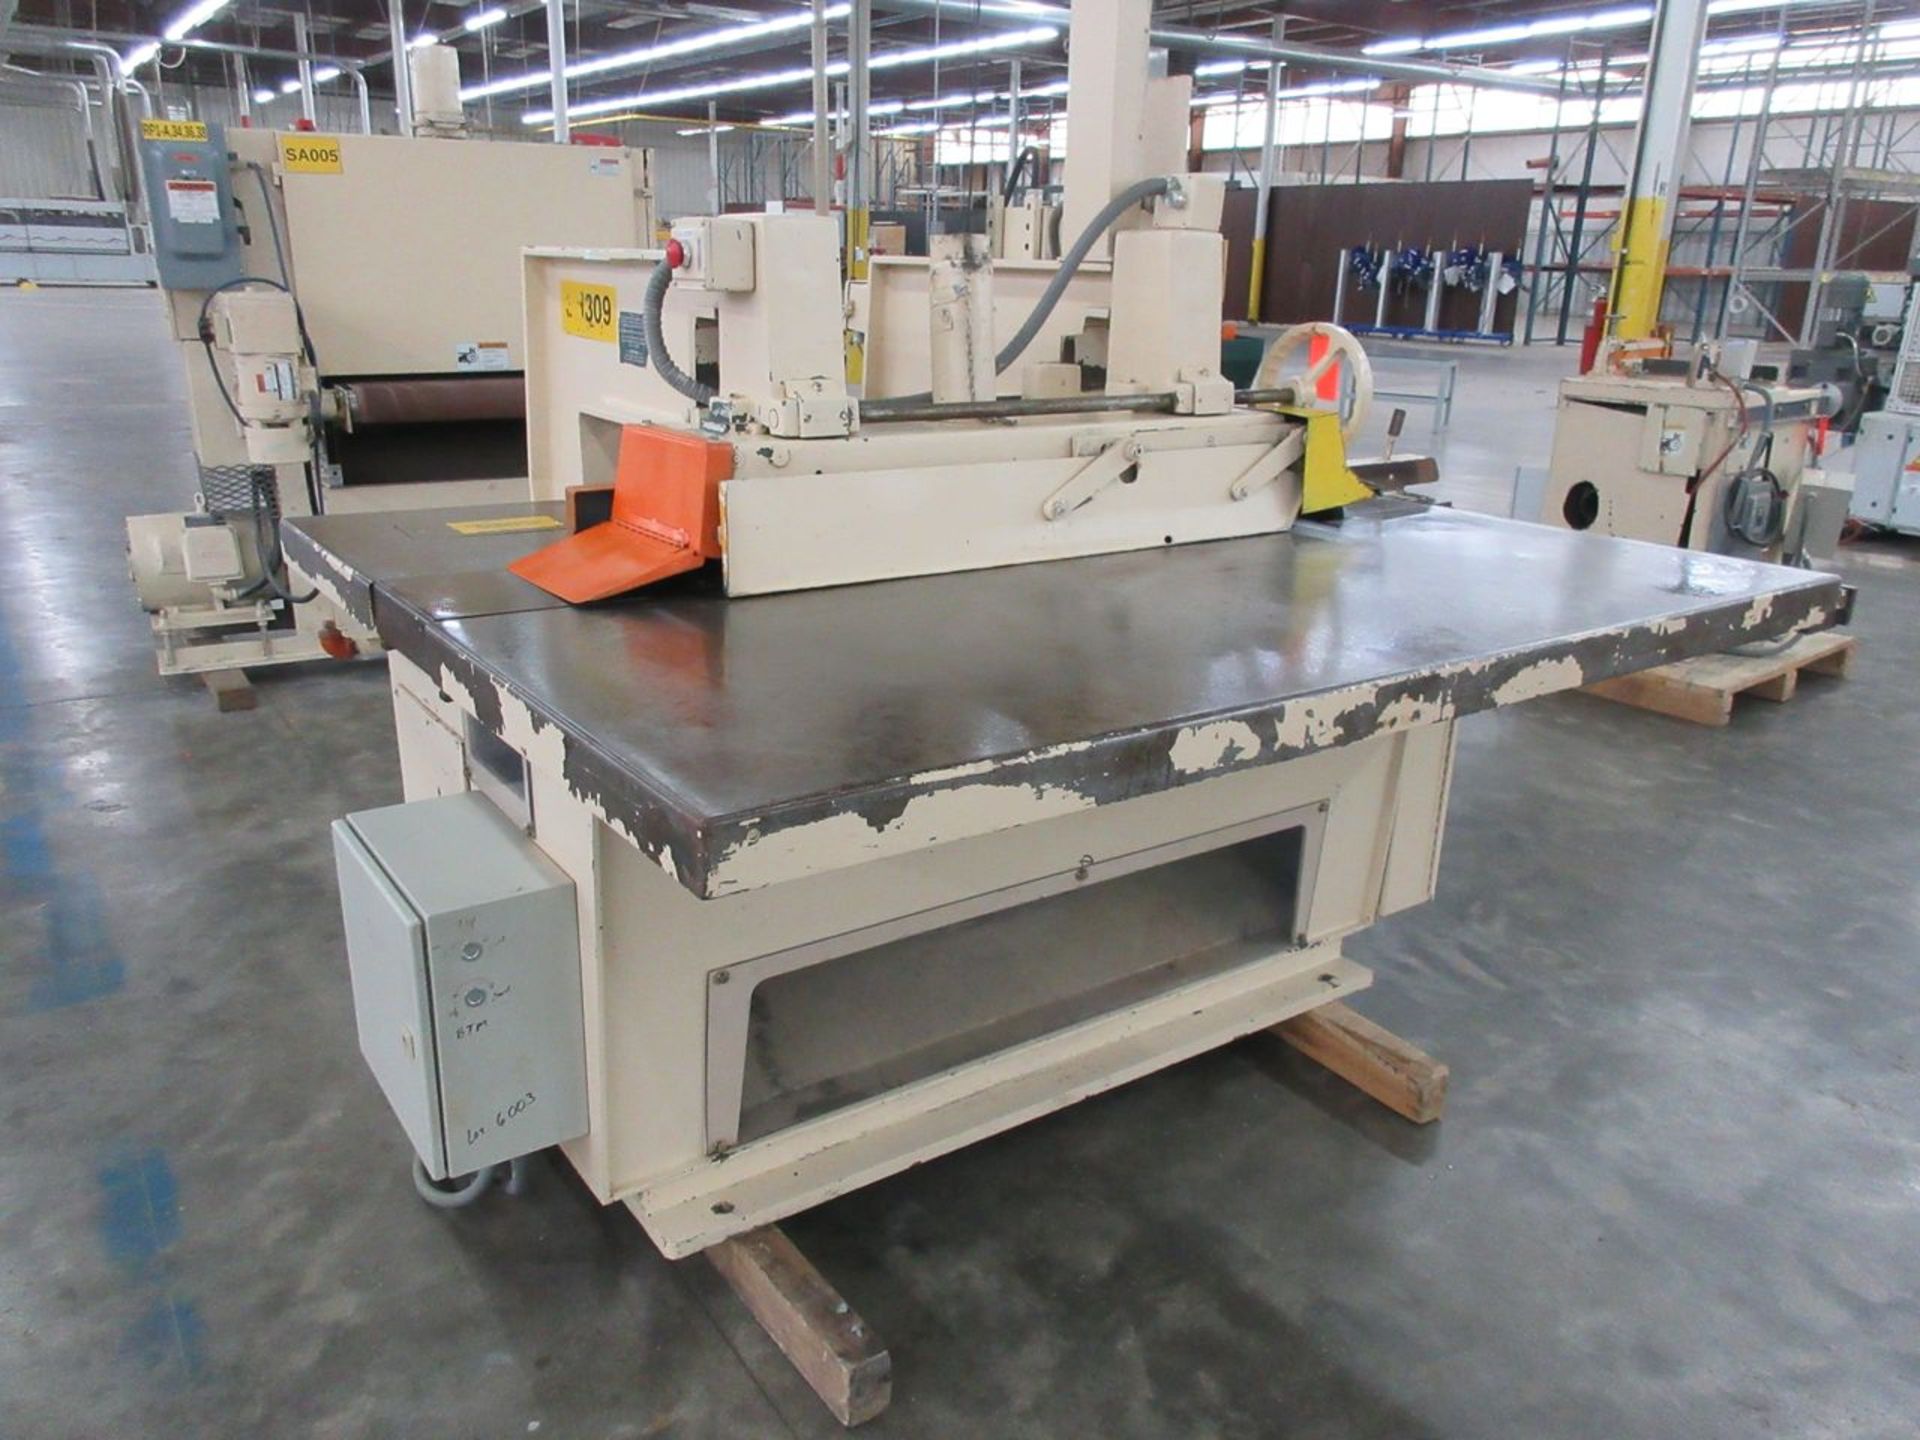 Diehl Model SL-52 Straight Line Chain-Fed Rip Saw, S/N: 10/85M4860-4276; with 25 in. Throat, 15-HP - Image 2 of 7